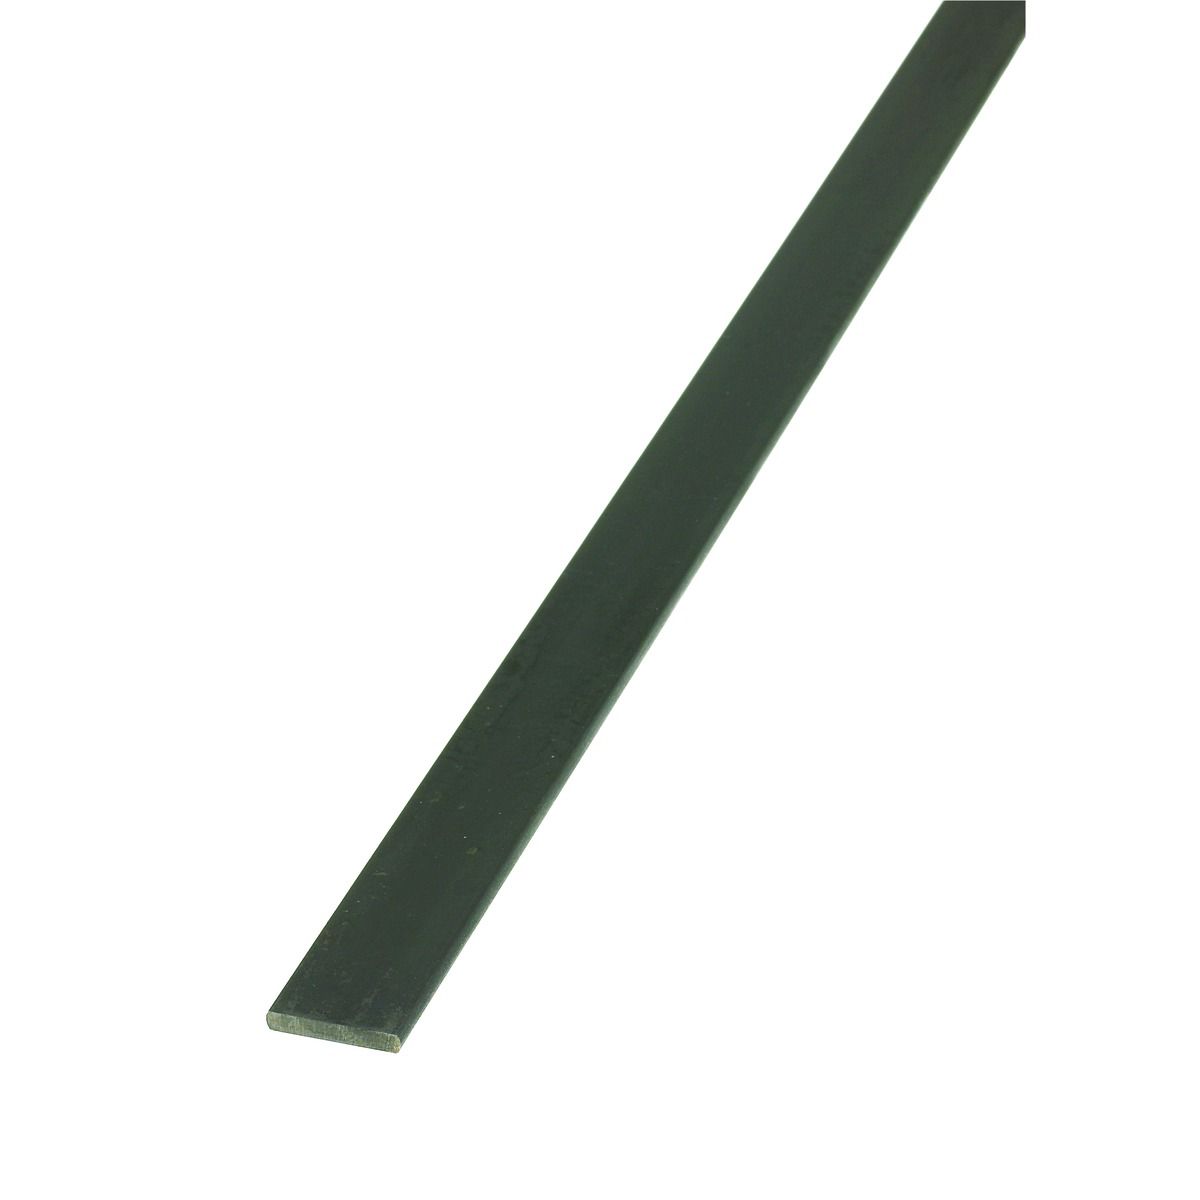 Image of Wickes Multi-Purpose Flat Steel Bar - 2m Length / 4mm Thickness